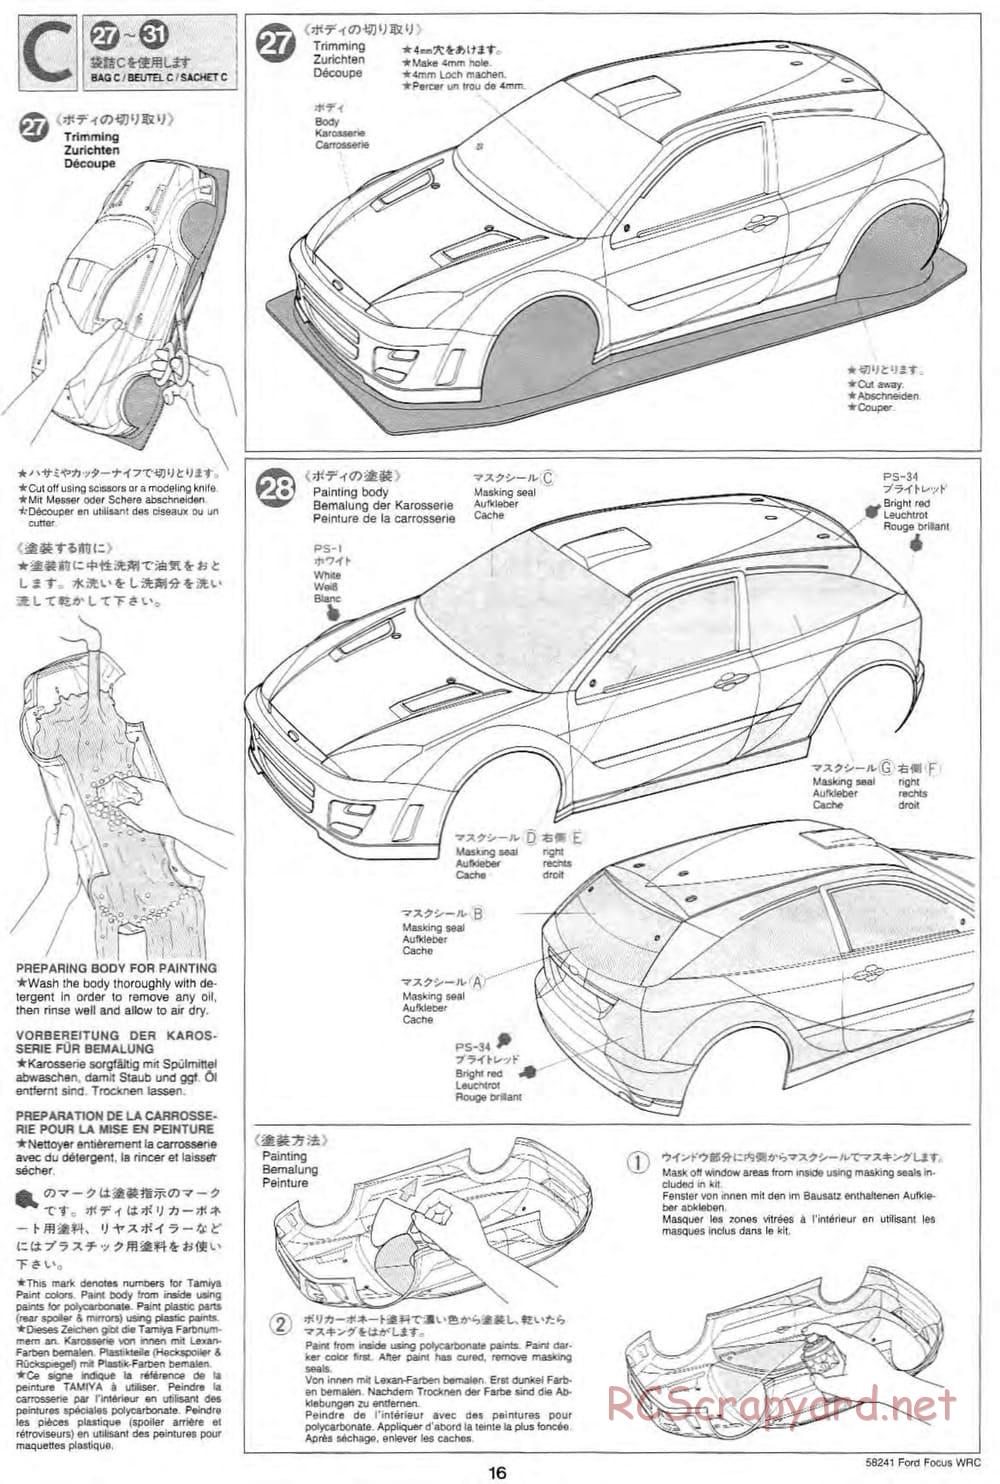 Tamiya - Ford Focus WRC - TL-01 Chassis - Manual - Page 16